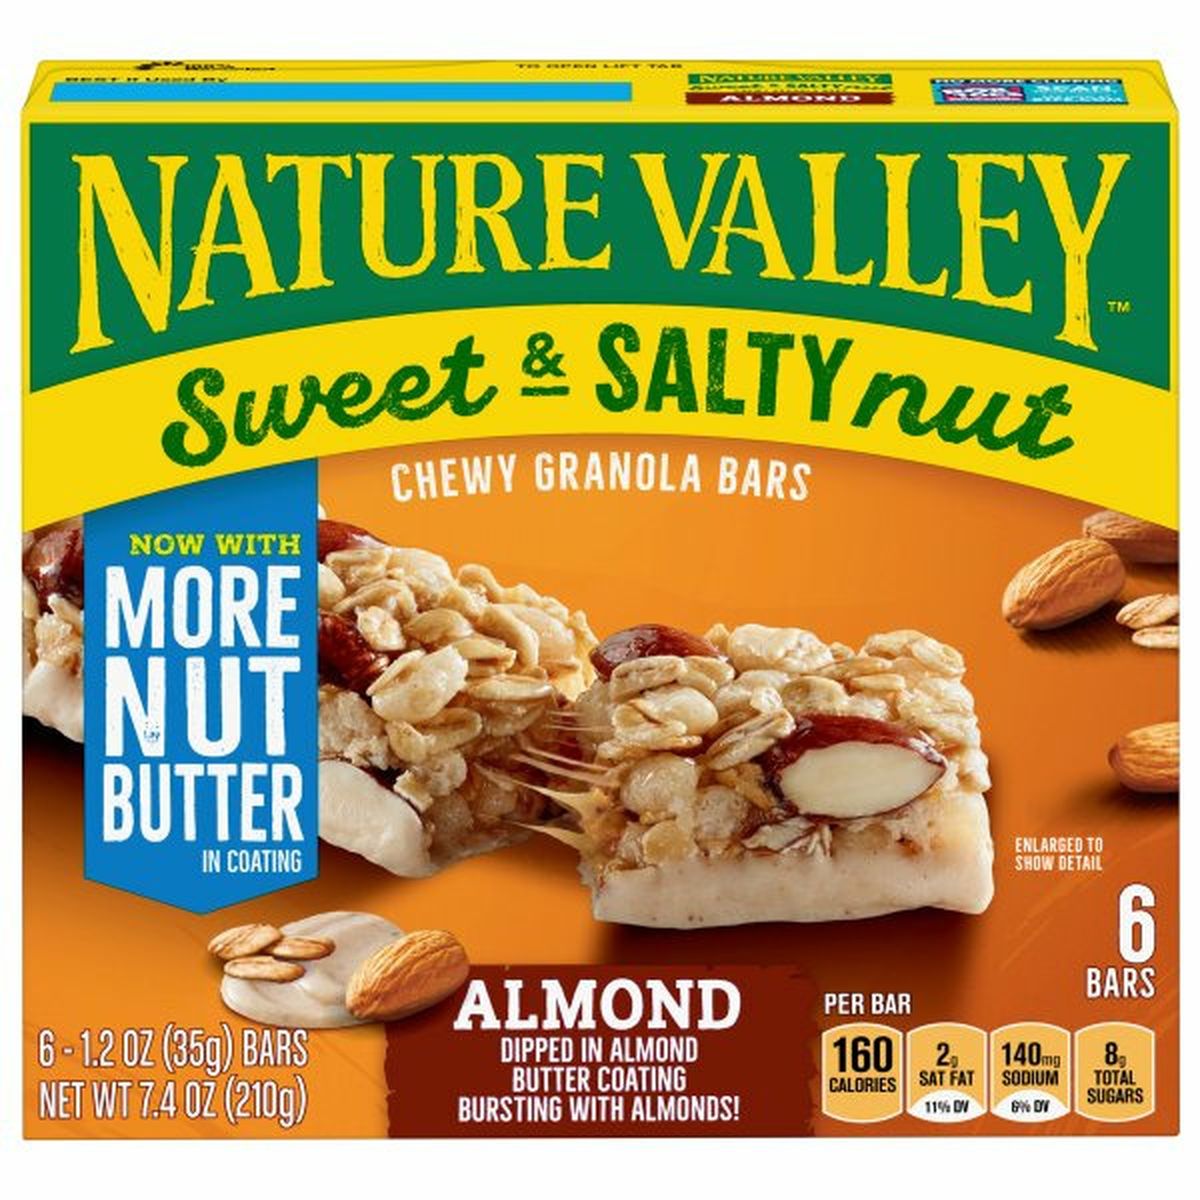 Calories in Nature Valley Granola Bars, Almond, Chewy, Sweet & Salty Nut